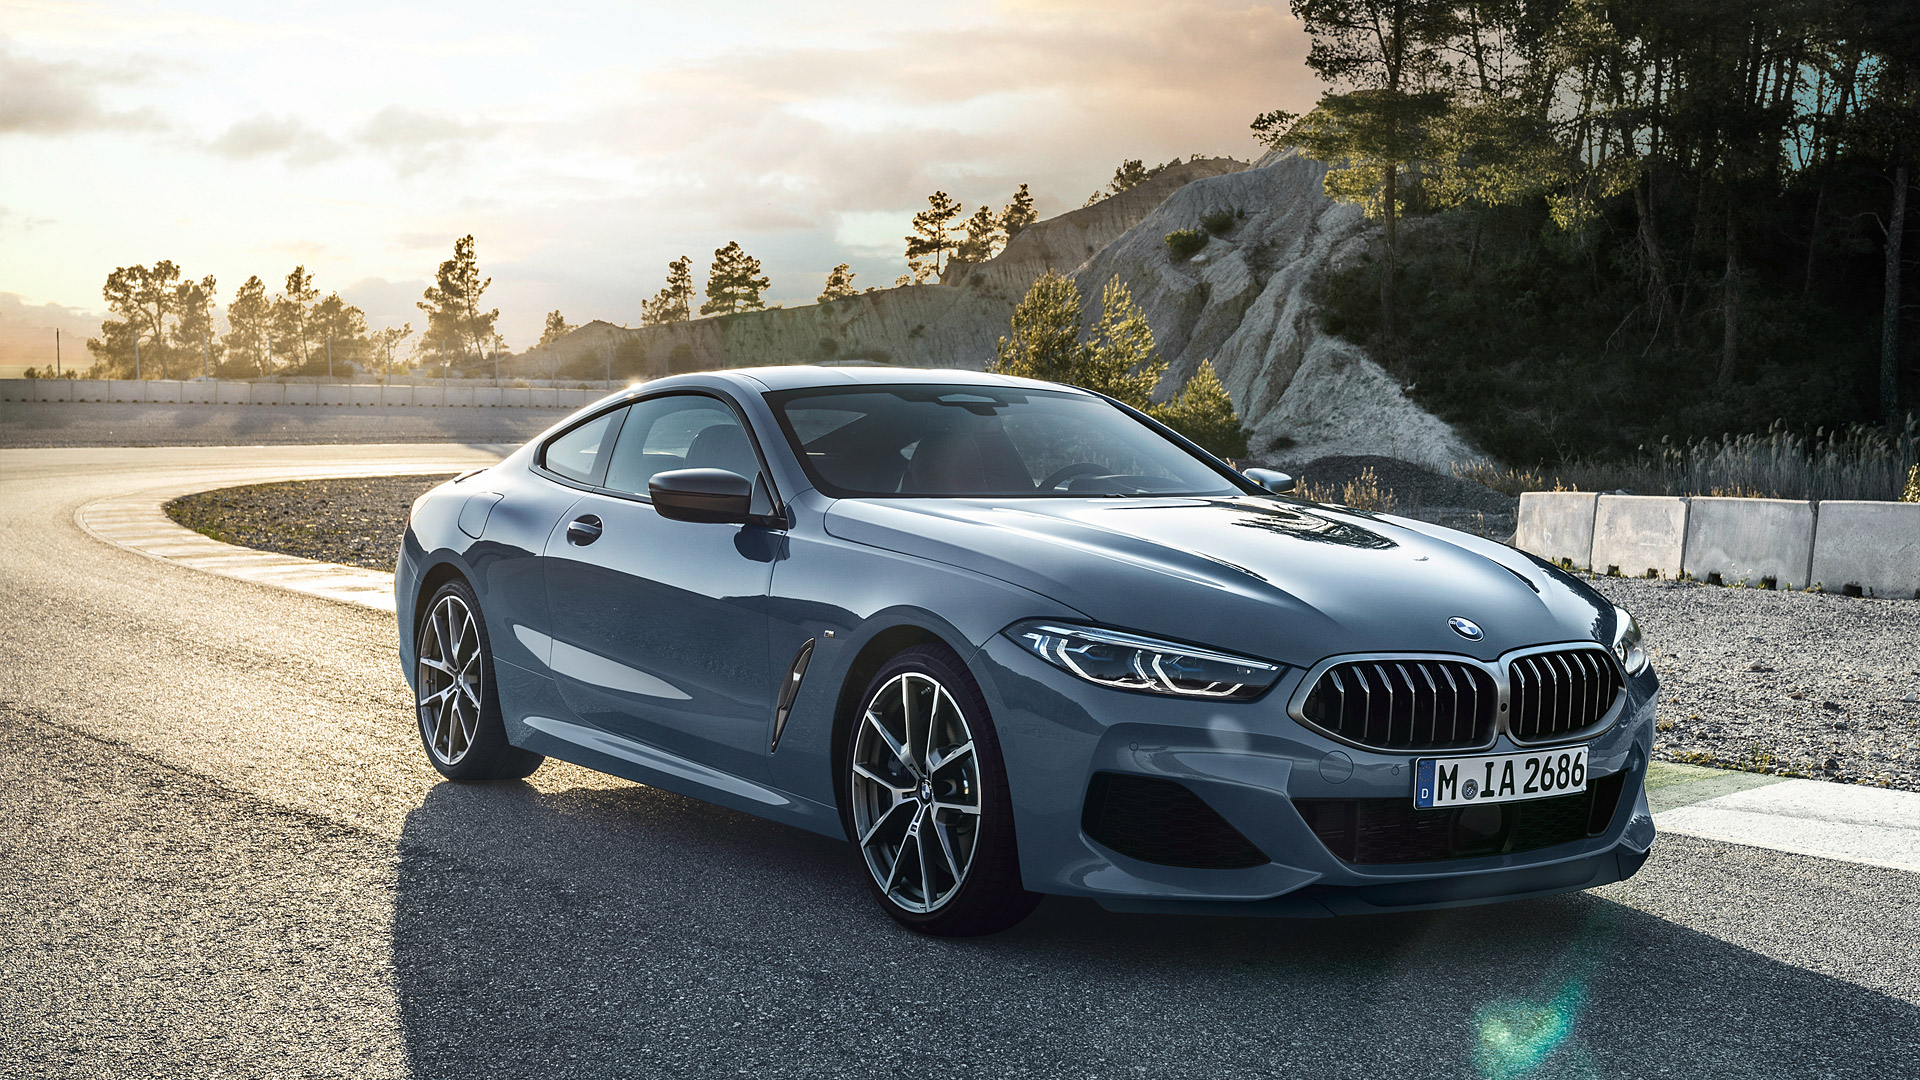 Bmw Series Coupe Wallpaper HD Image Wsupercars